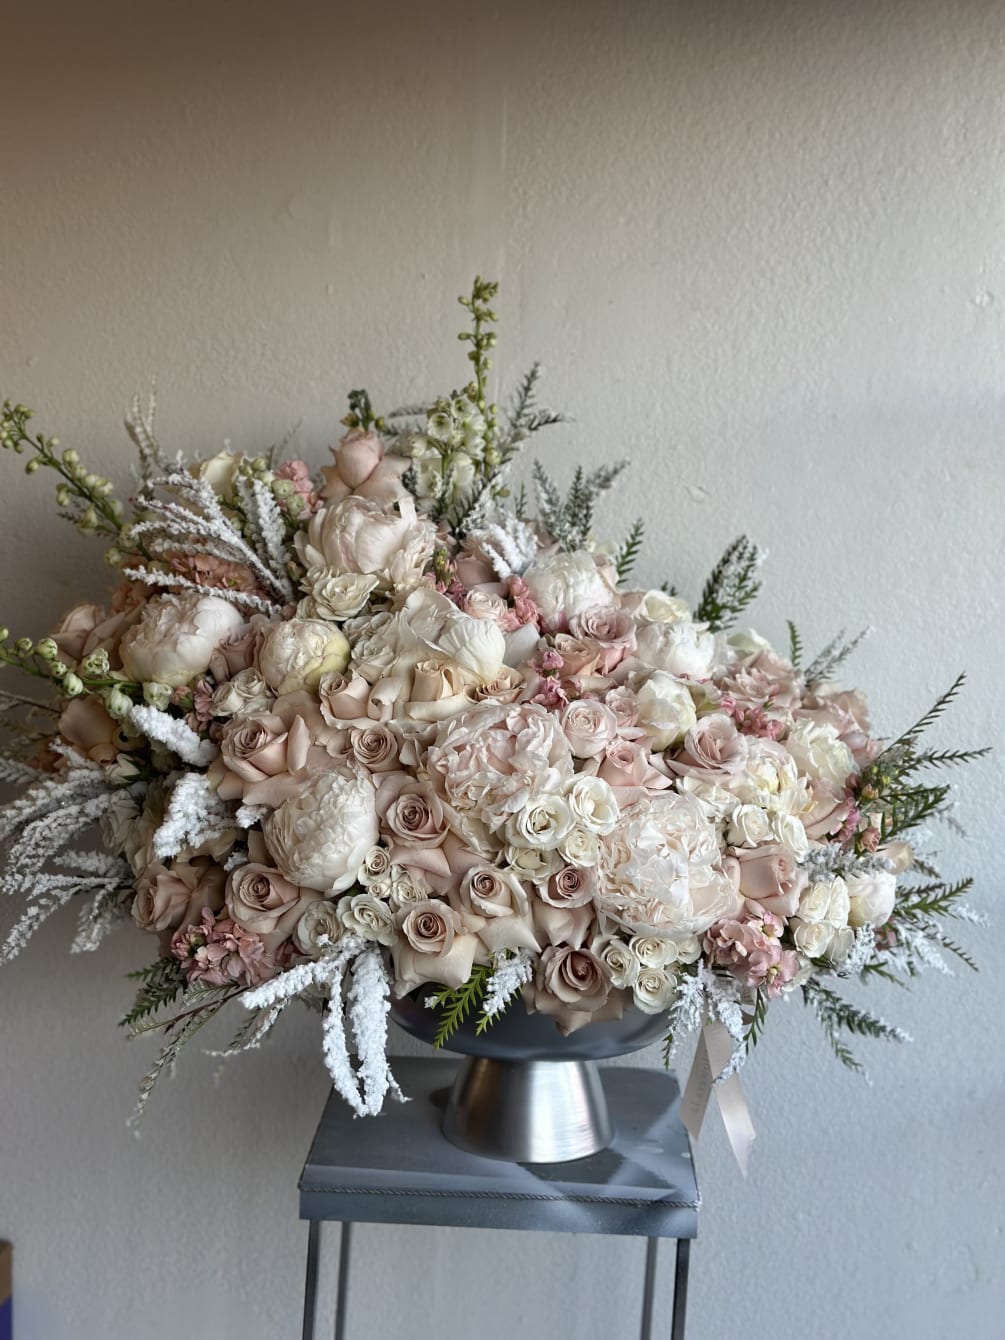 Silver vase filled with white and nuderoses, white peonies, and winter greenery.